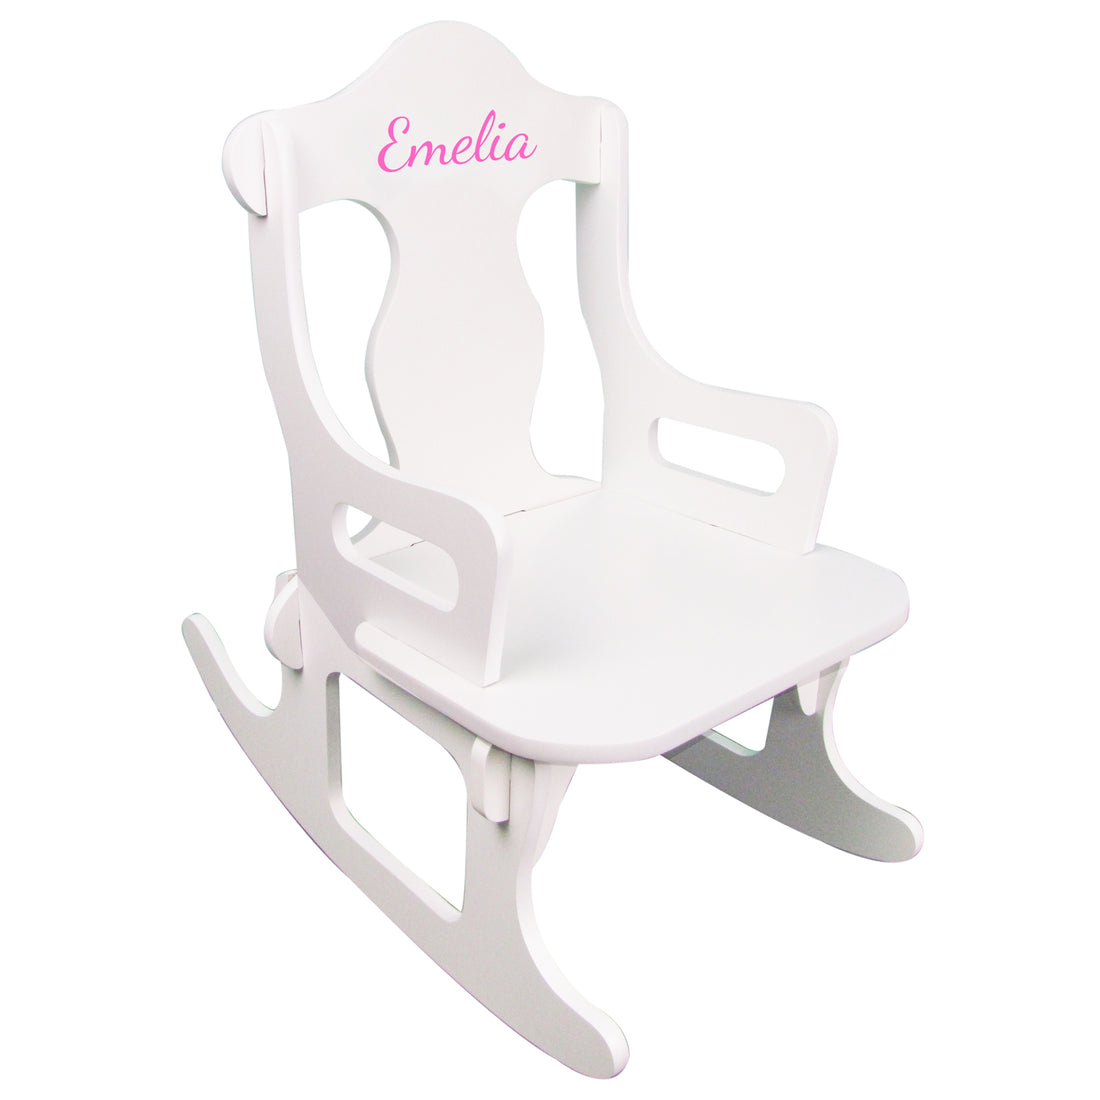 childs puzzle rocking chair with name